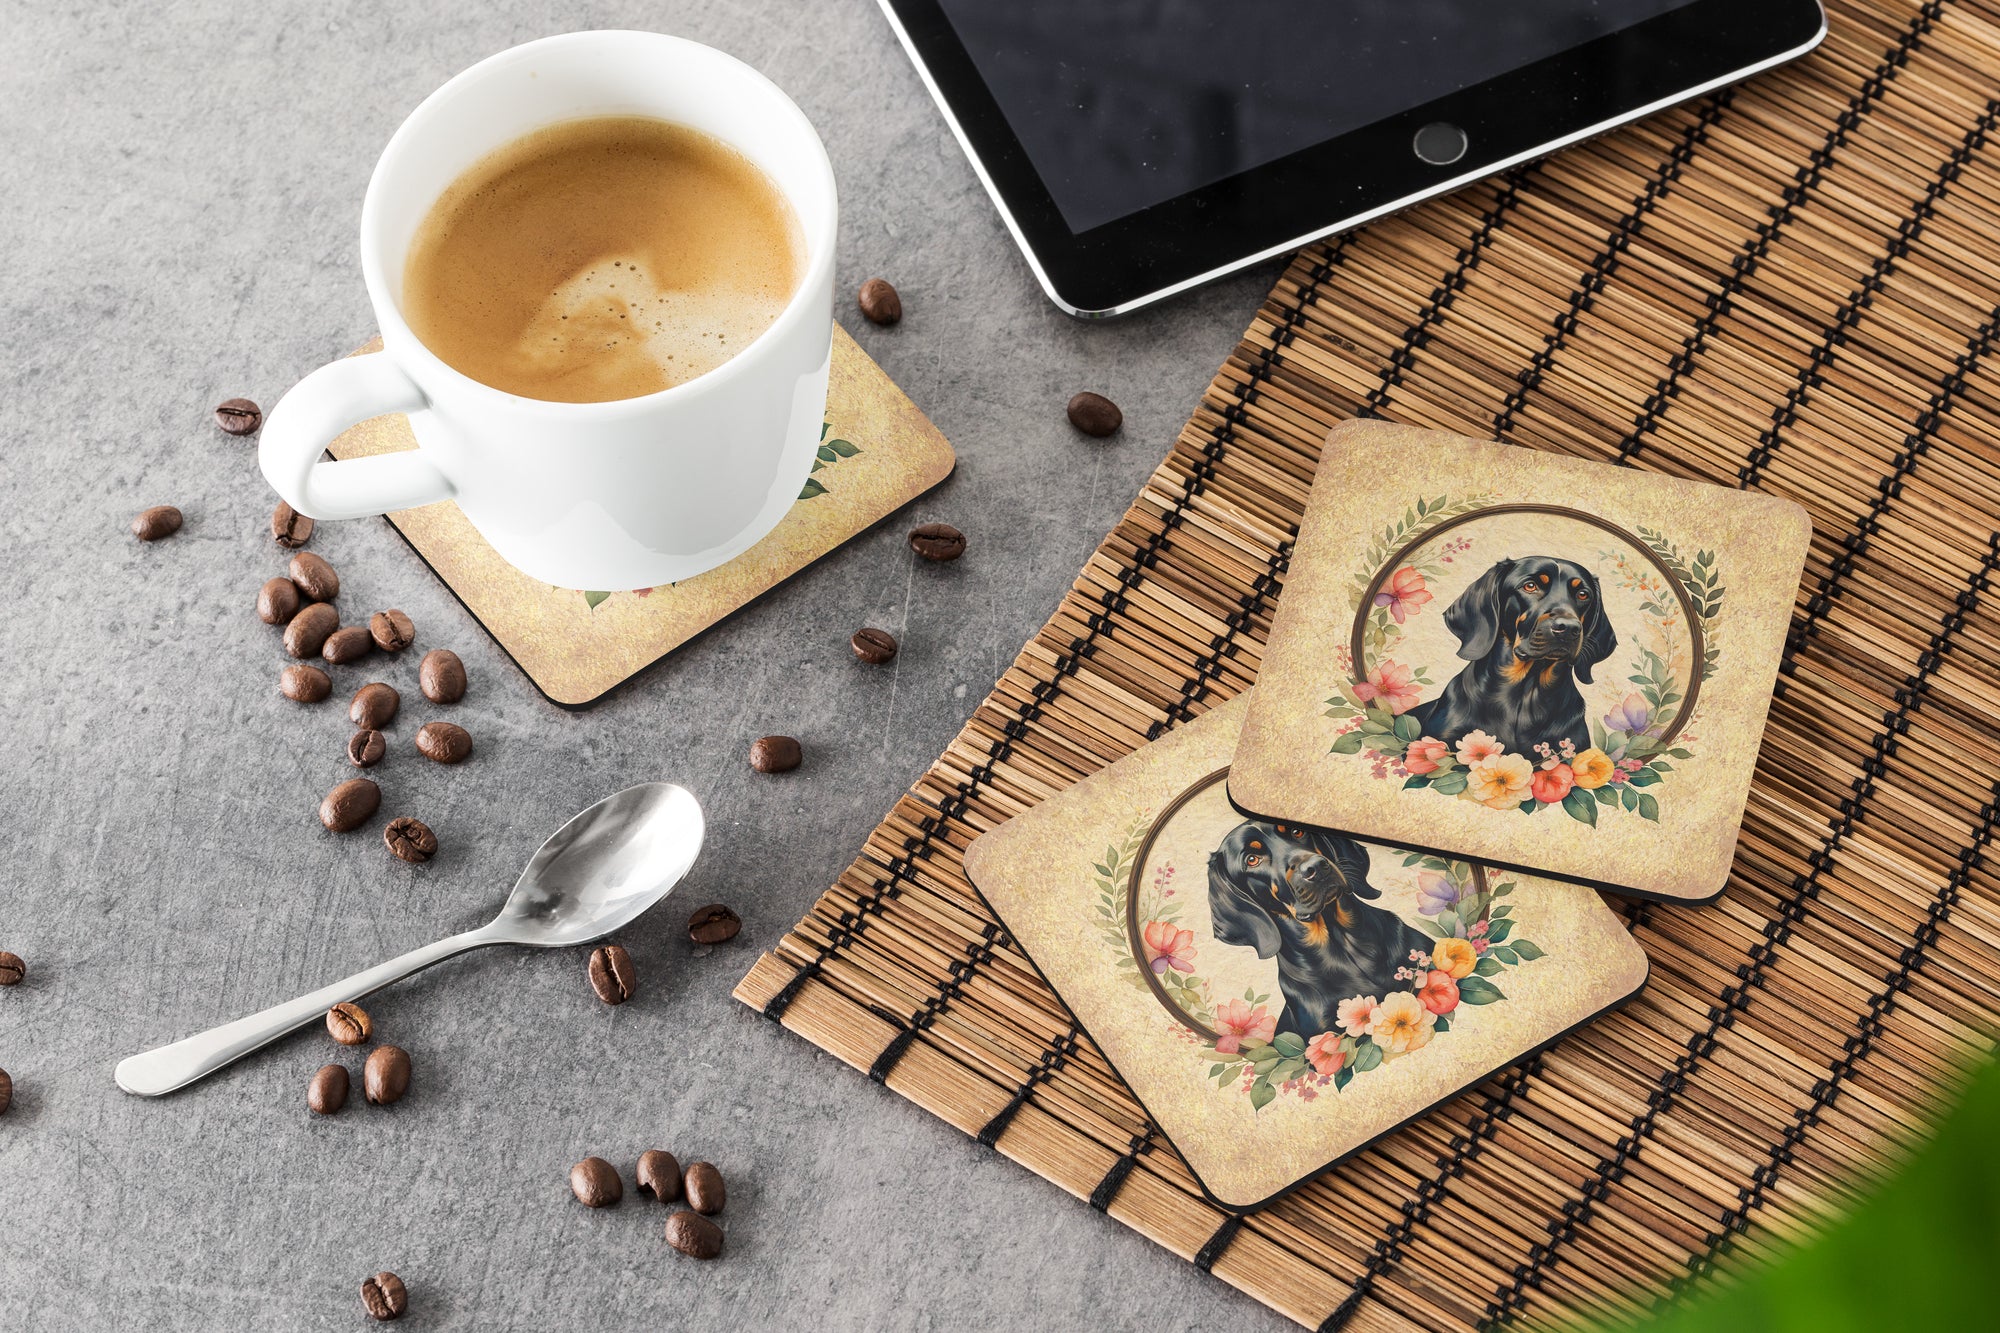 Black and Tan Coonhound and Flowers Foam Coasters